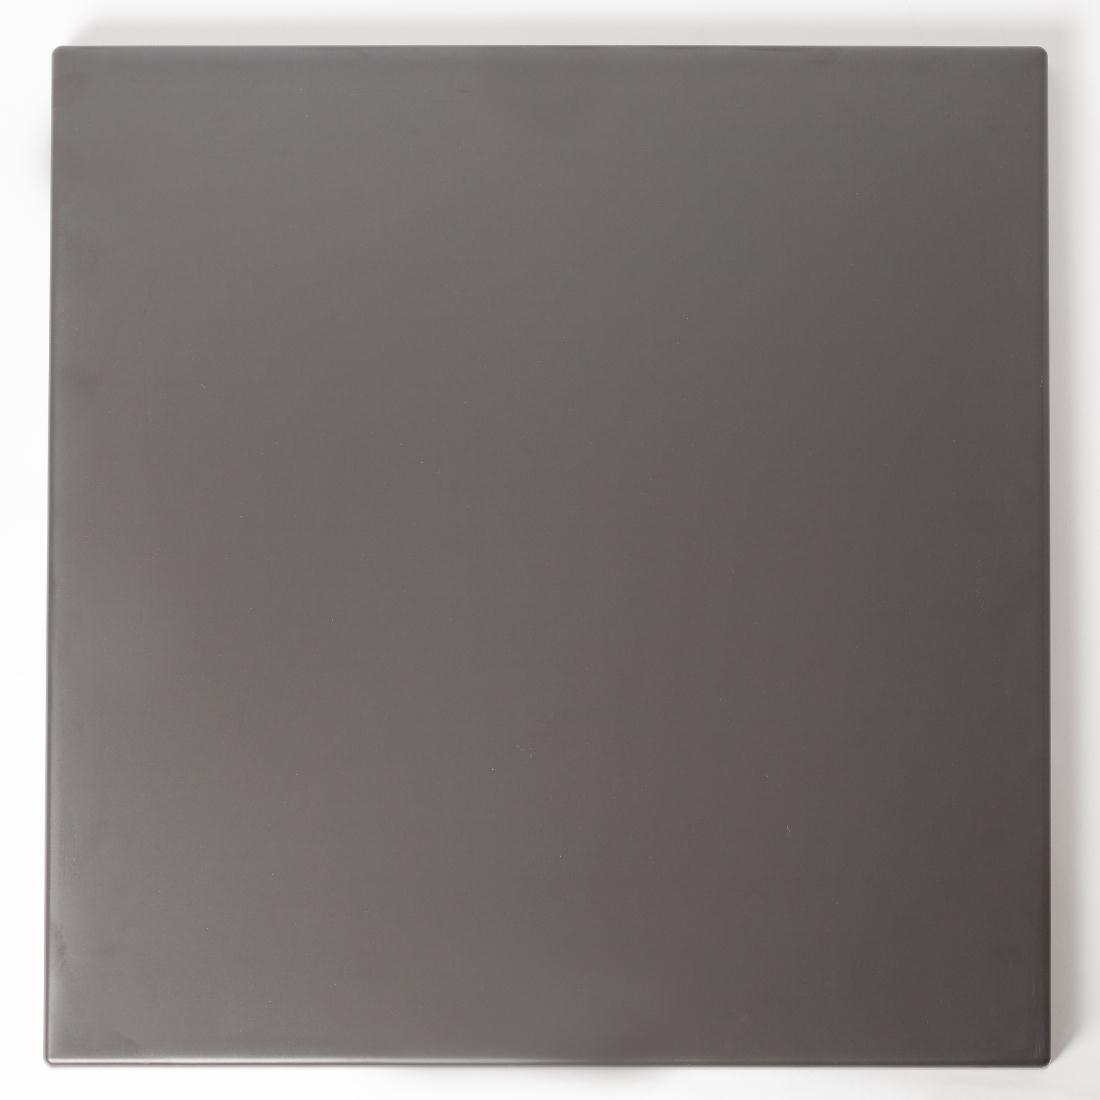 Werzalit Pre-drilled Square Table Top  Dark Grey 700mm